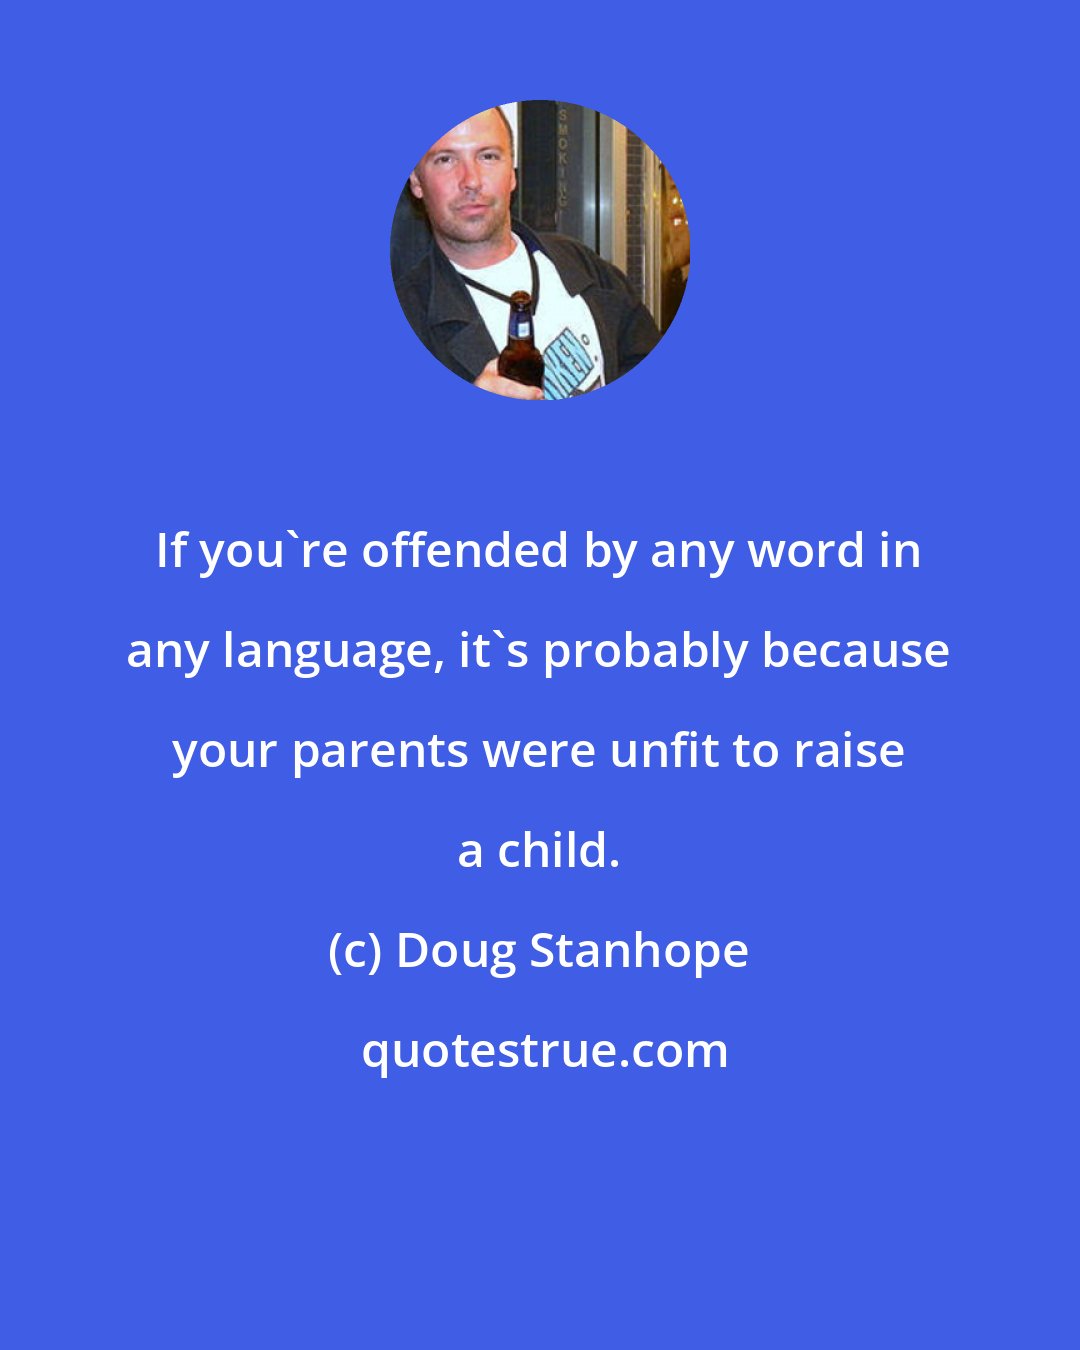 Doug Stanhope: If you're offended by any word in any language, it's probably because your parents were unfit to raise a child.